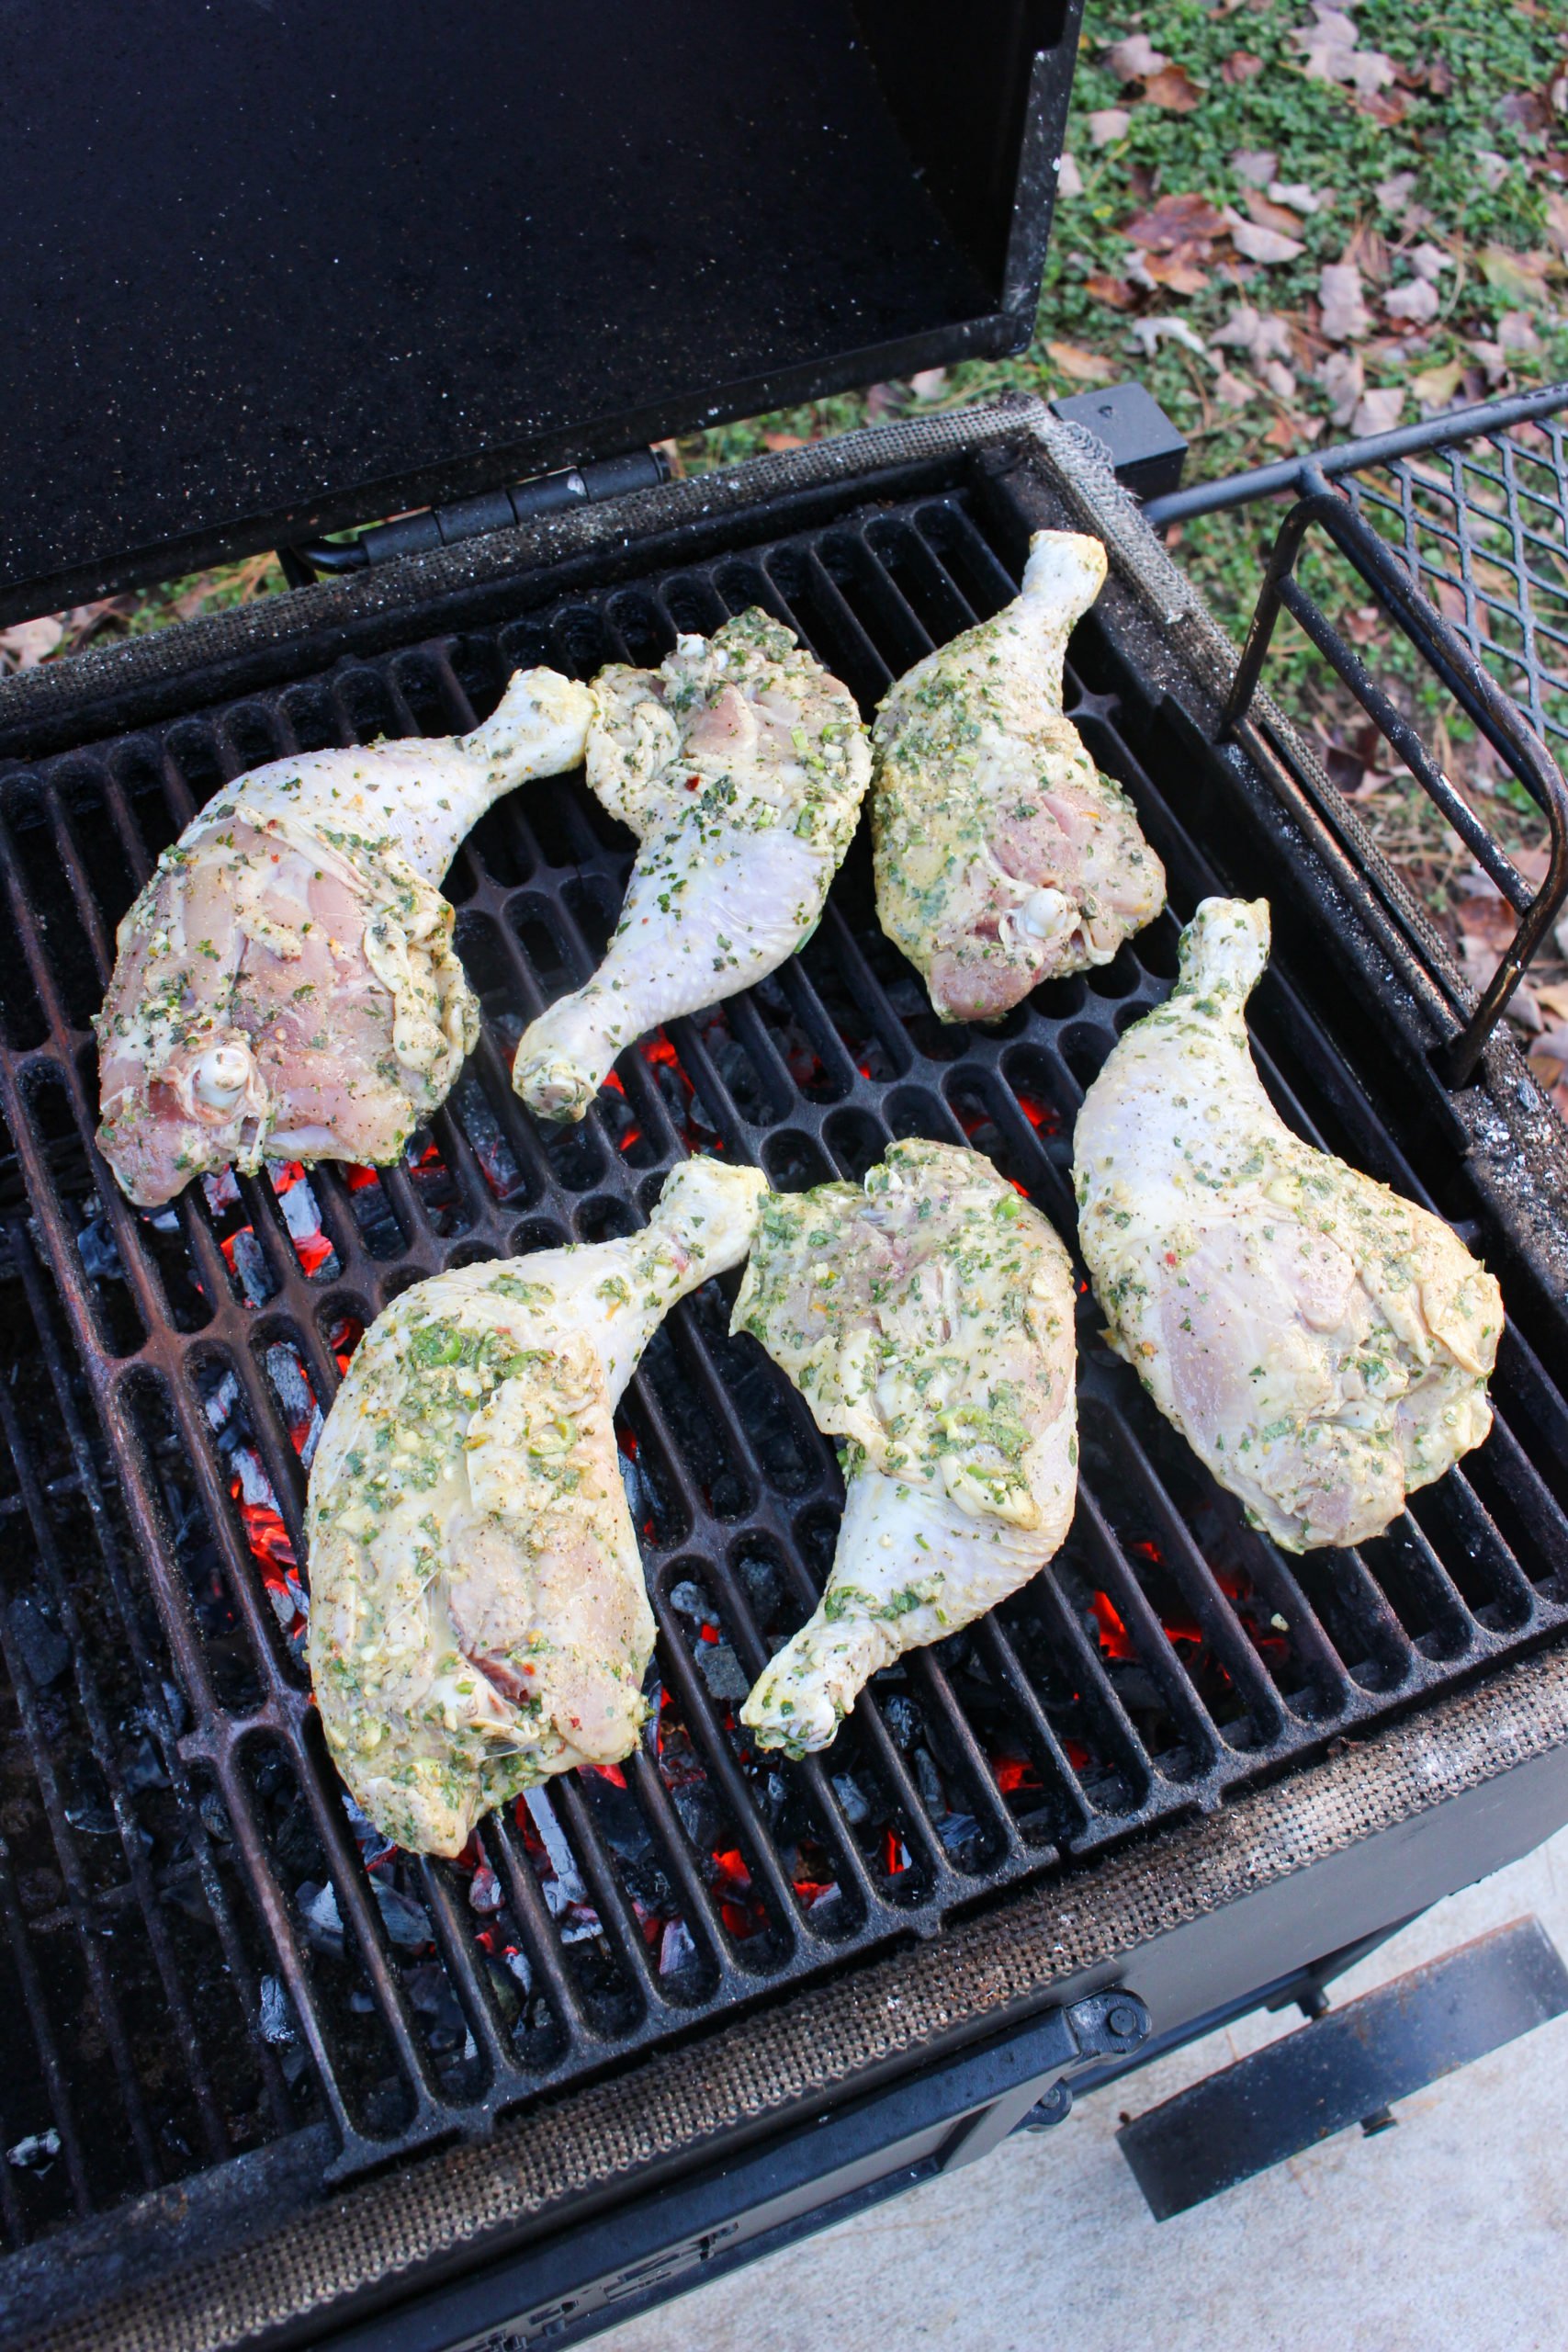 Grilled Mojo Chicken starting to cook over the coals.